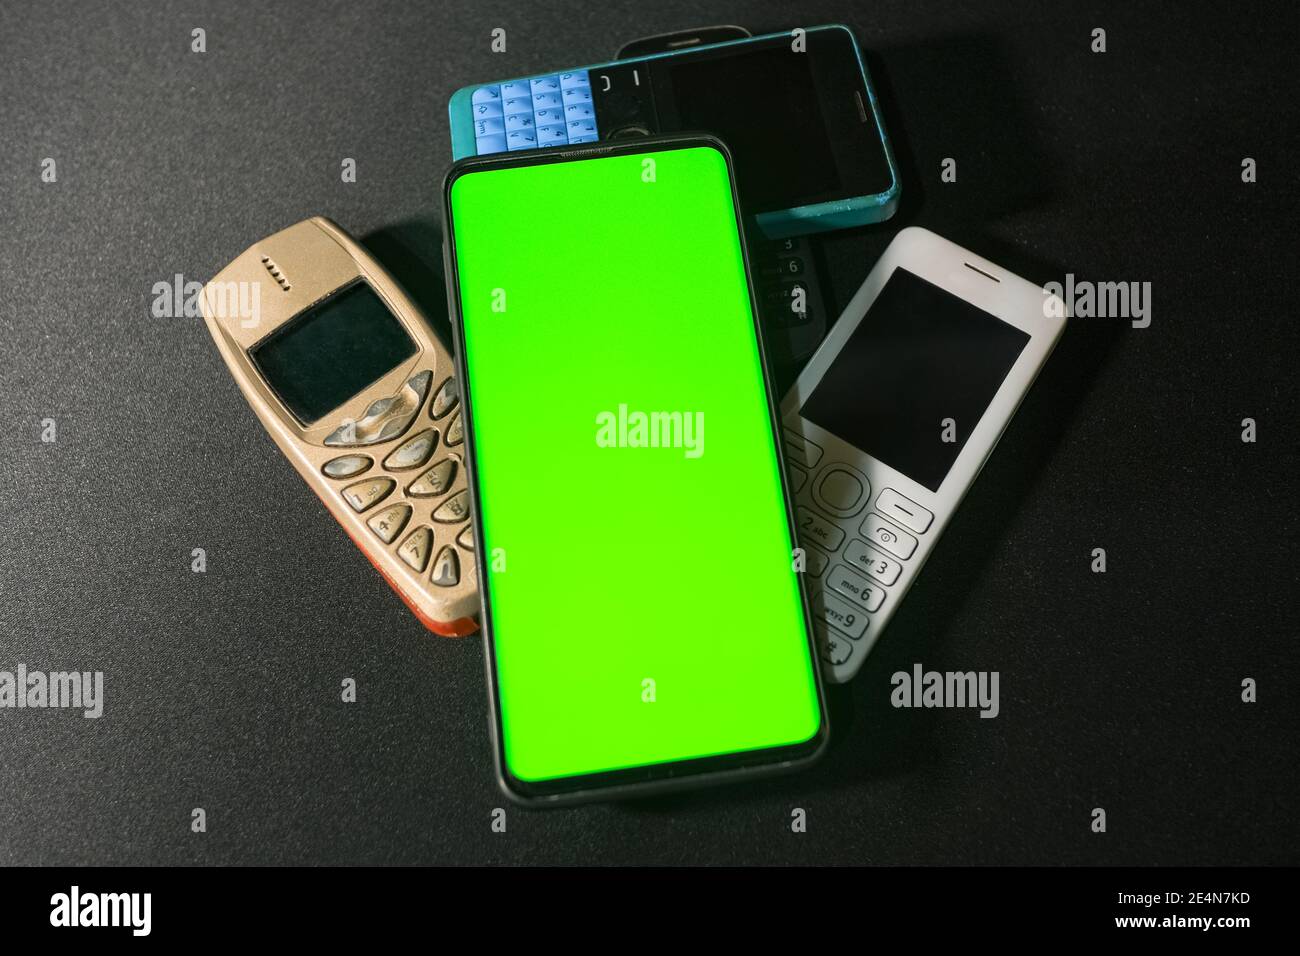 New smartphone green screen on old gen mobile phones,technology concept Stock Photo